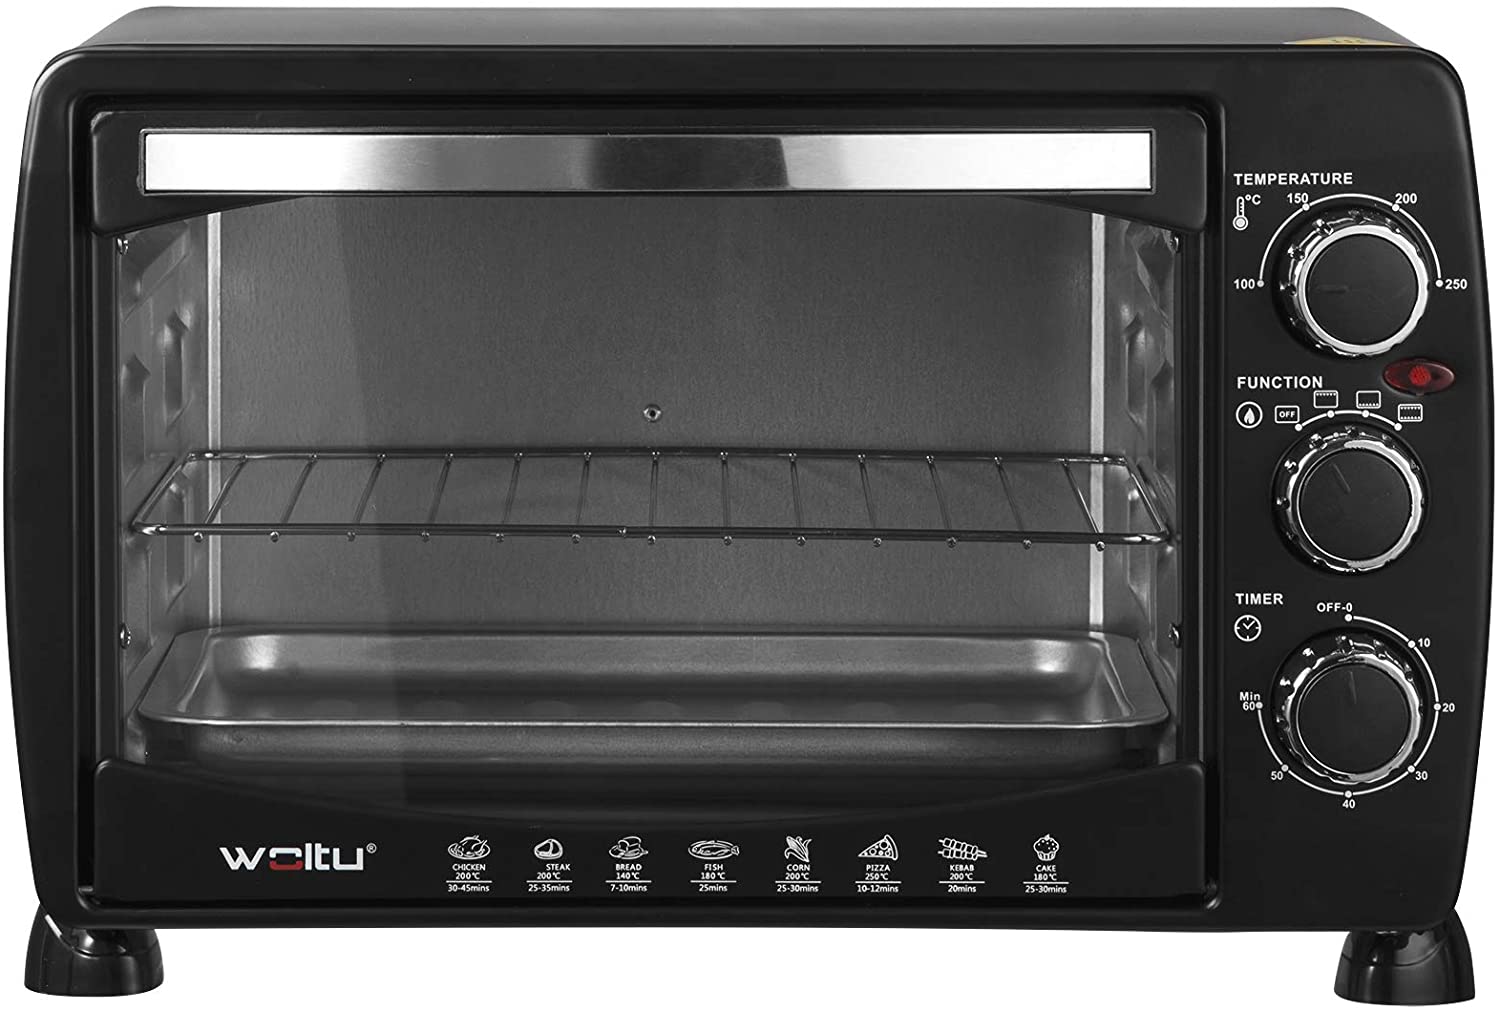 WOLTU Mini Oven, 20-Litre Pizza Oven, Double Glass Door with Baking Tray and Time